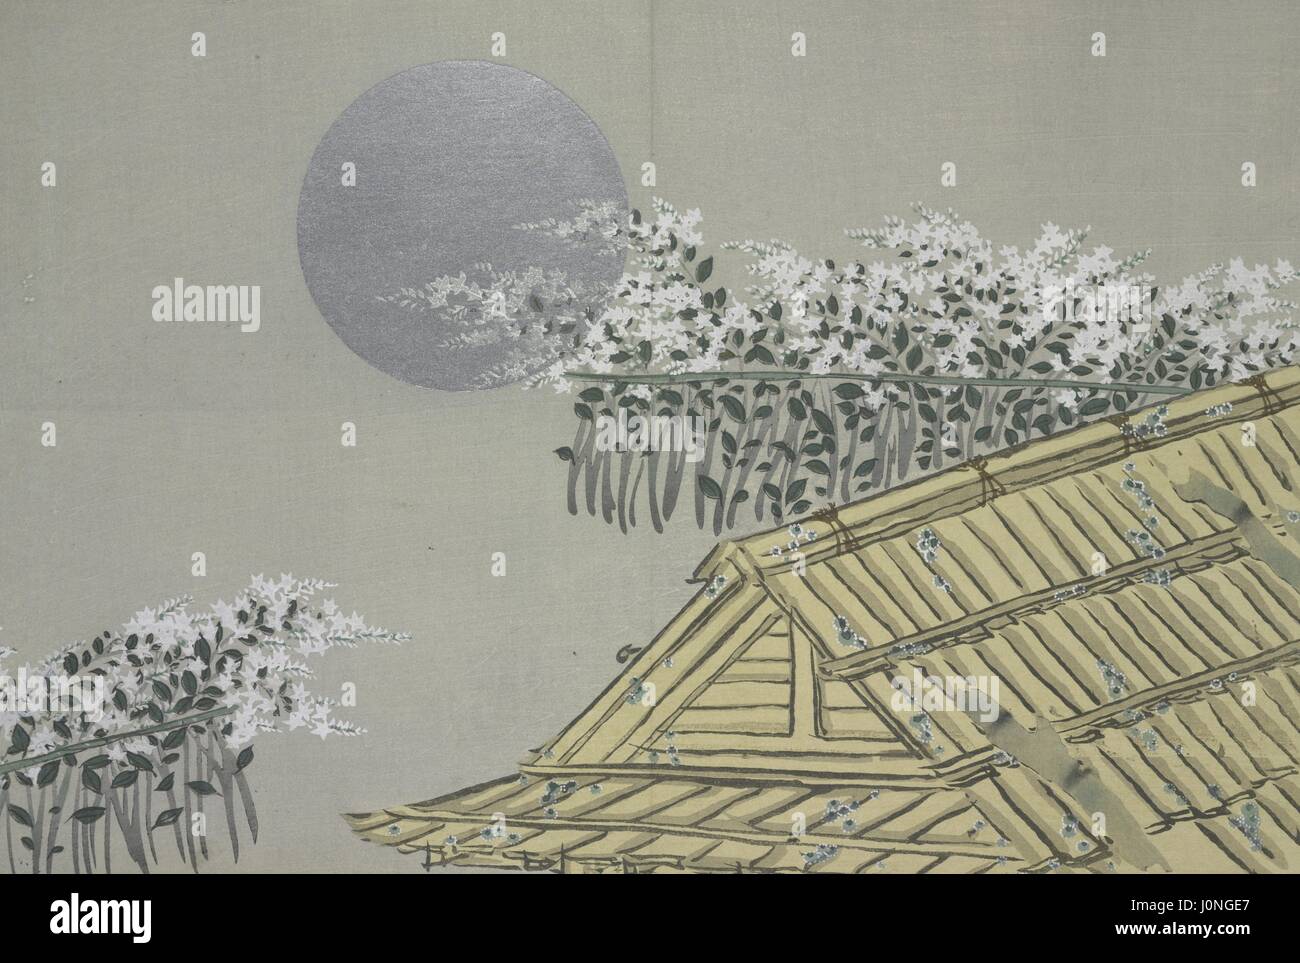 Japanese woodcut of a traditional bamboo house, flowers, and the moon from the book Momoyogusa; Flowers of a Hundred Generations by Sekka Kamisaka, 1909. From the New York Public Library. Stock Photo